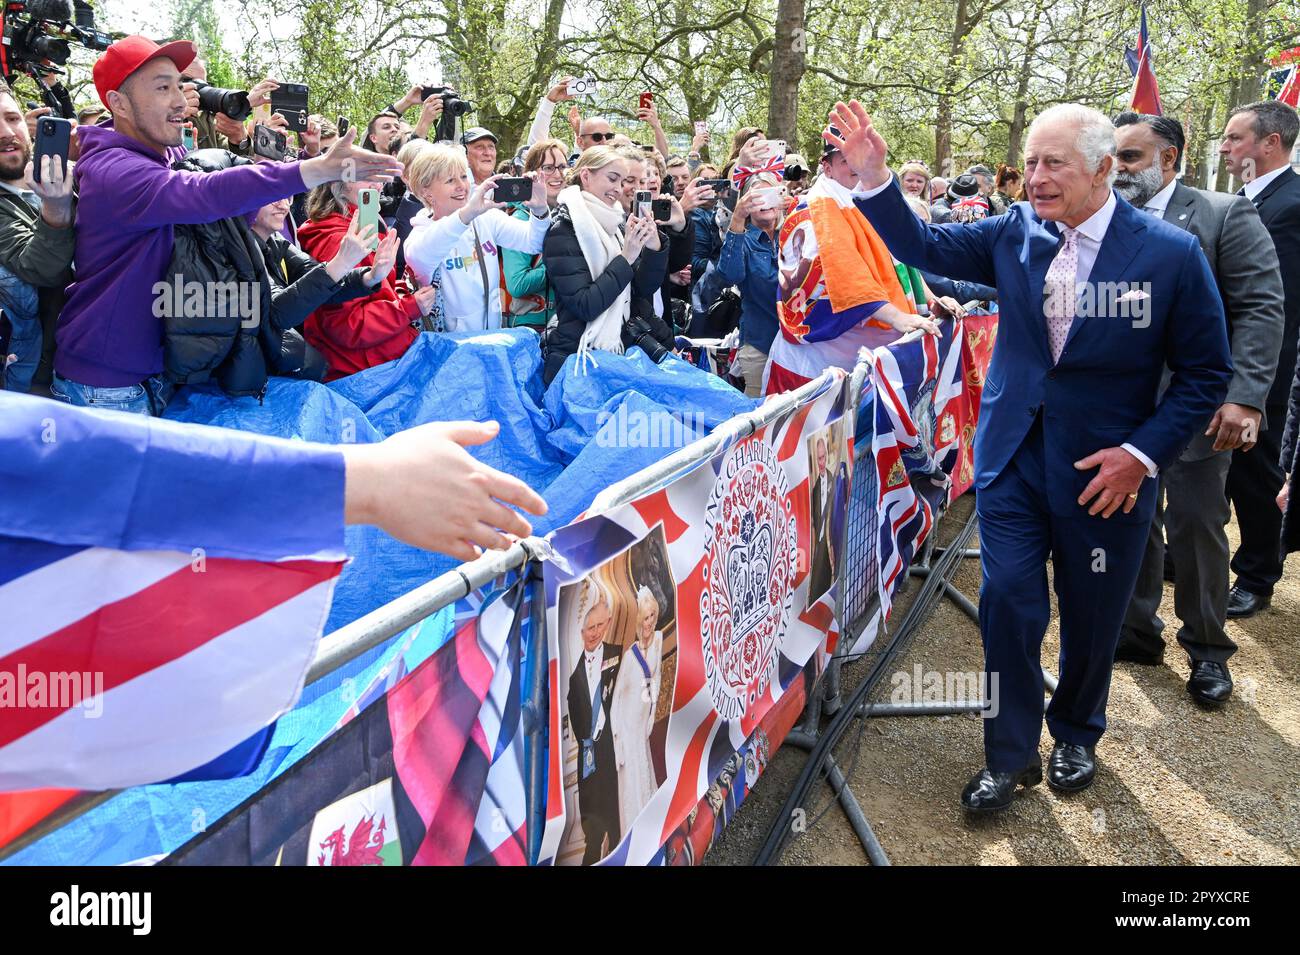 King Charles III on a walkabout outside Buckingham Palace, London, to meet wellwishers ahead of the coronation on Saturday. Picture date: Friday May 5, 2023. Stock Photo